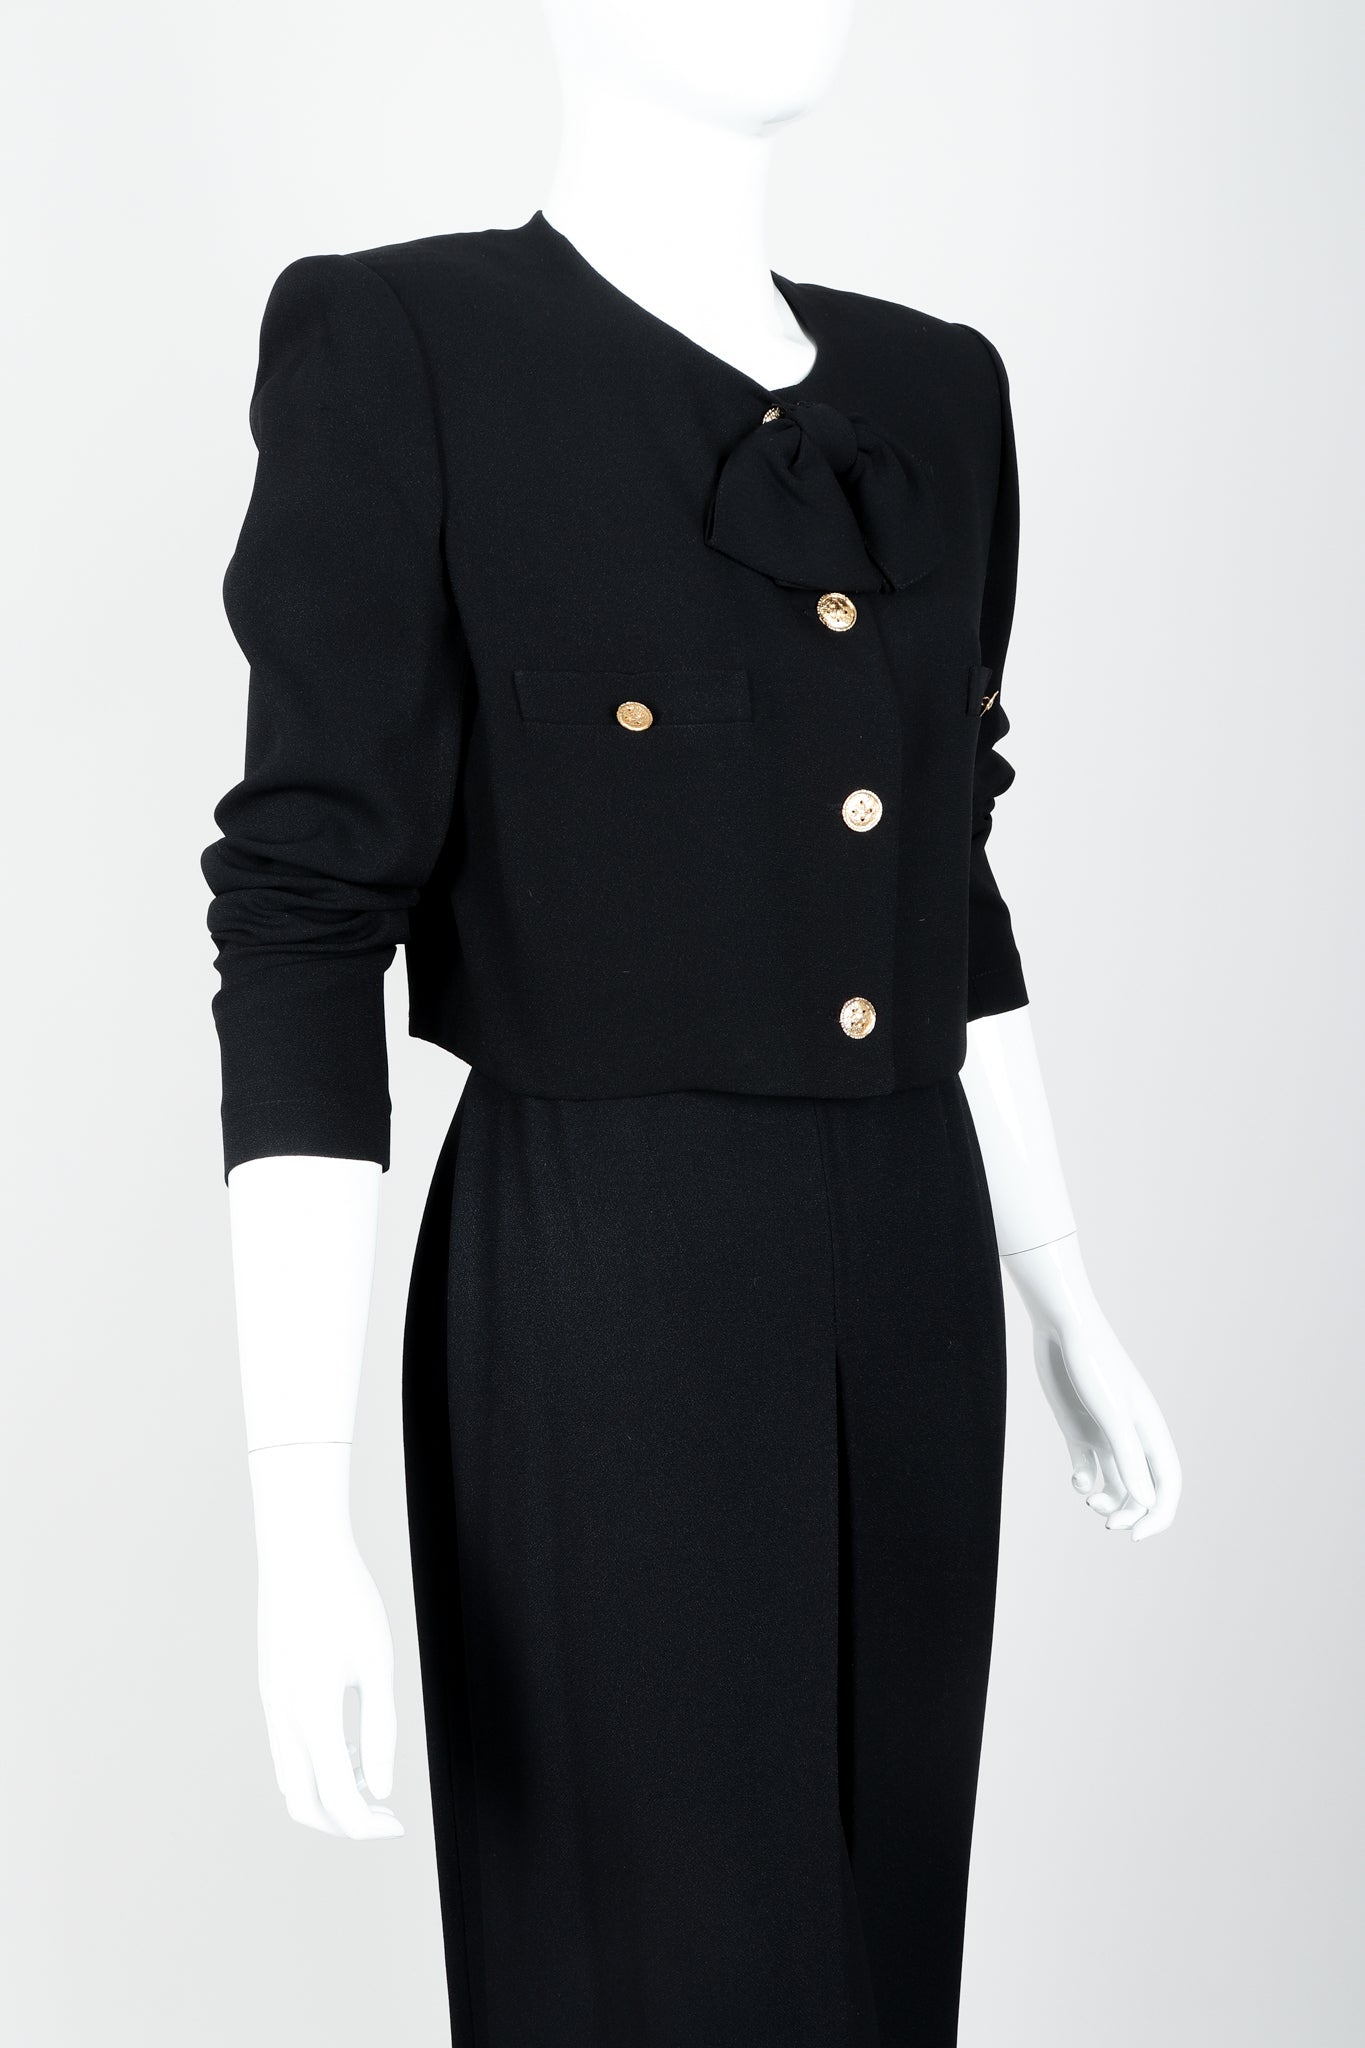 Vintage Sonia Rykiel Chanel Style Boxy Jacket & Pant Suit on Mannequin crop at Recess